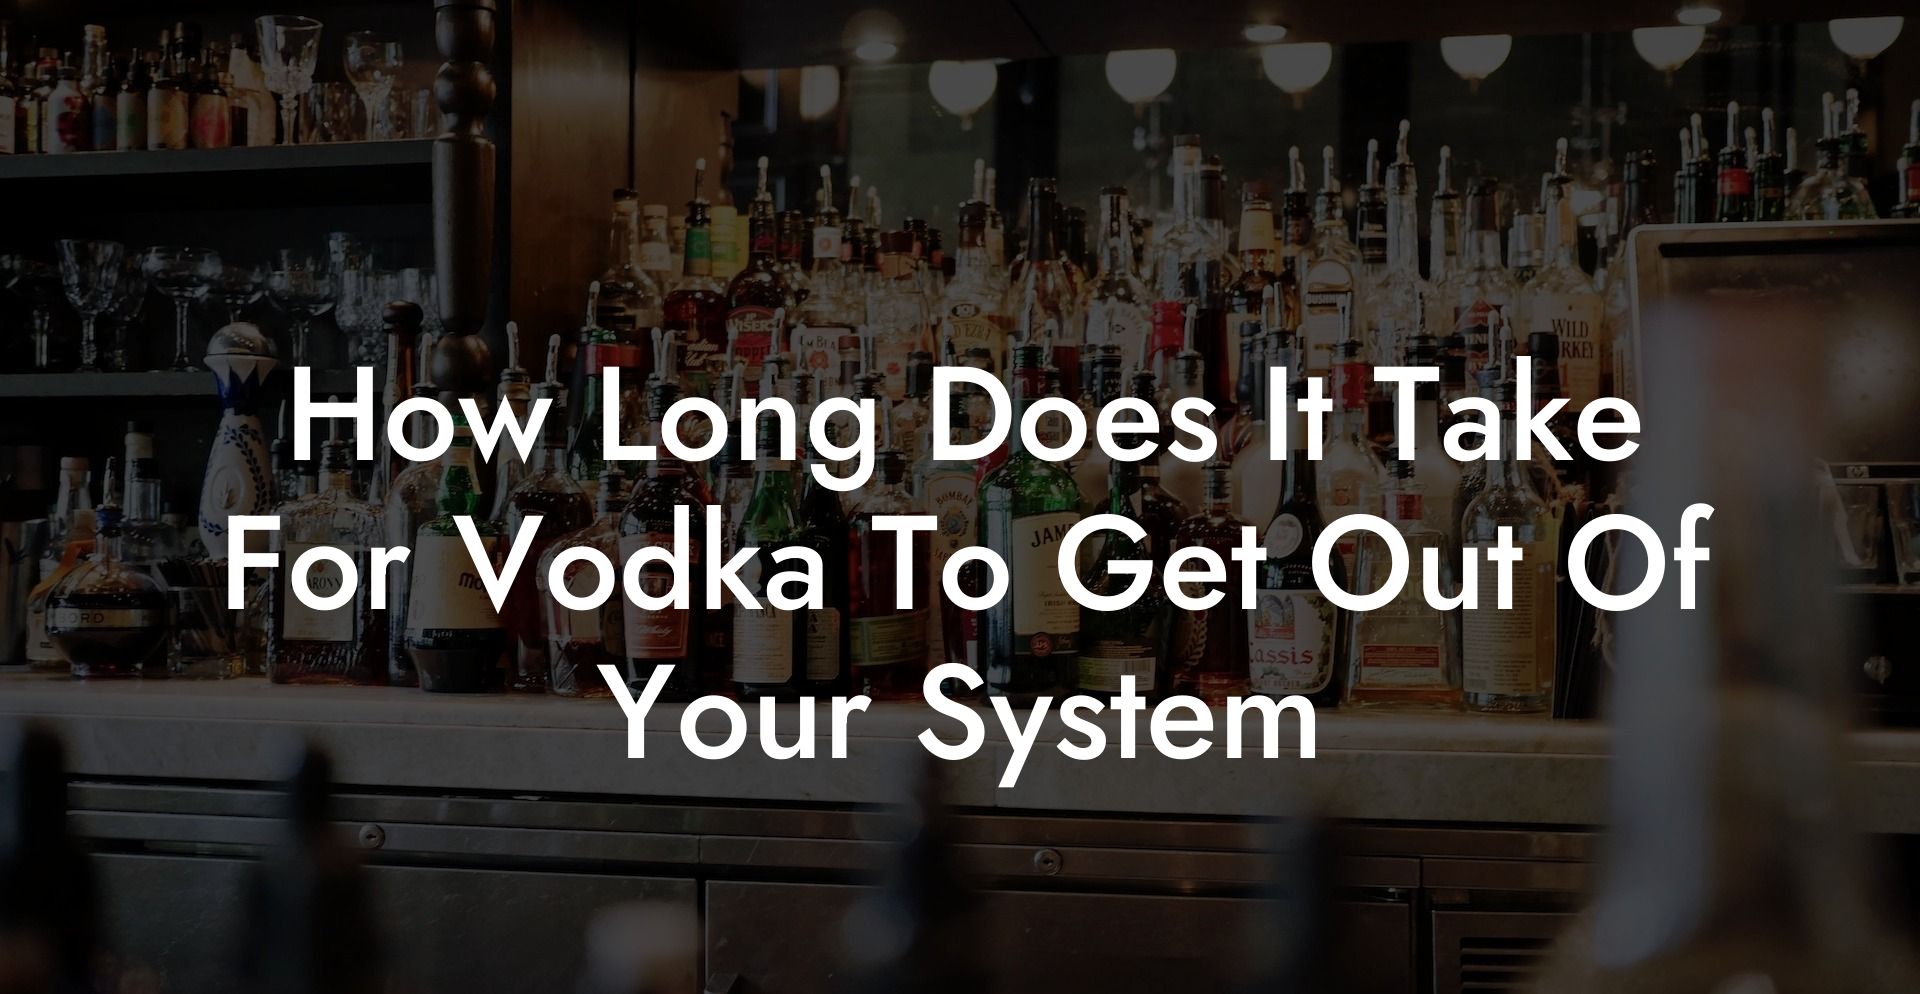 How Long Does It Take For Vodka To Get Out Of Your System